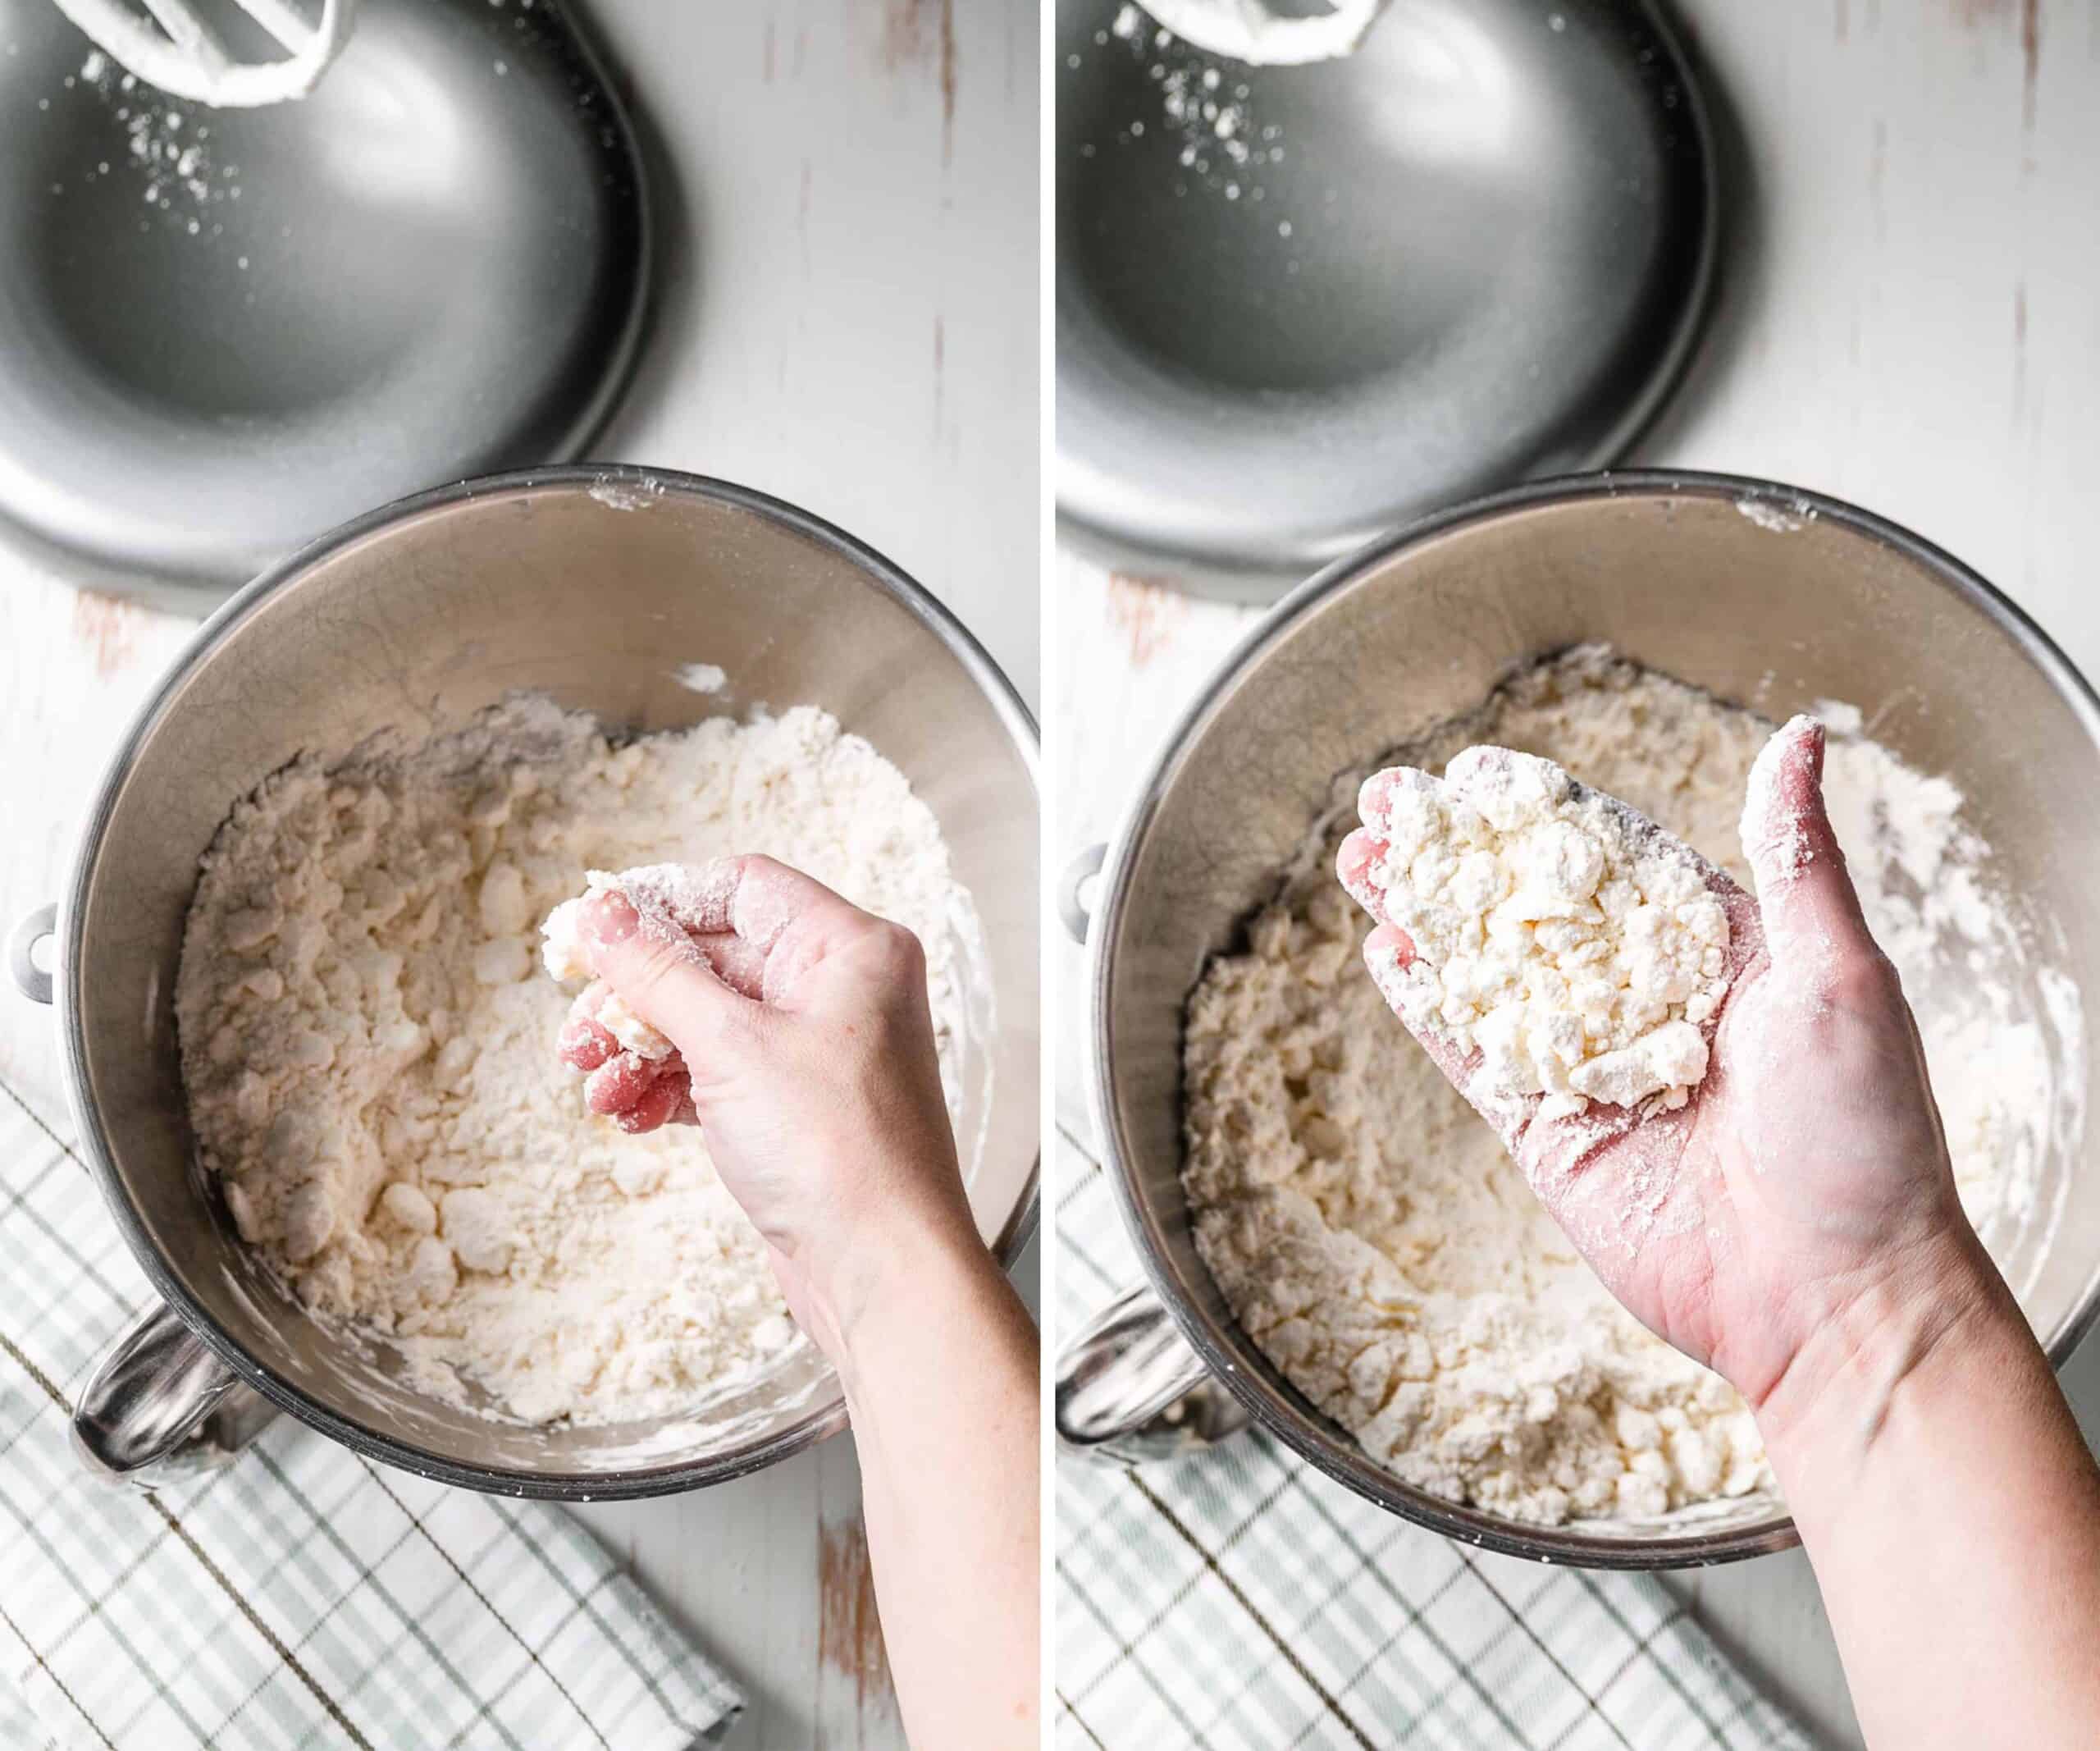 Image collage: 1. A hand pinching butter between fingers. 2. Hand holding a scoop of the mixture to display chunky butter texture.